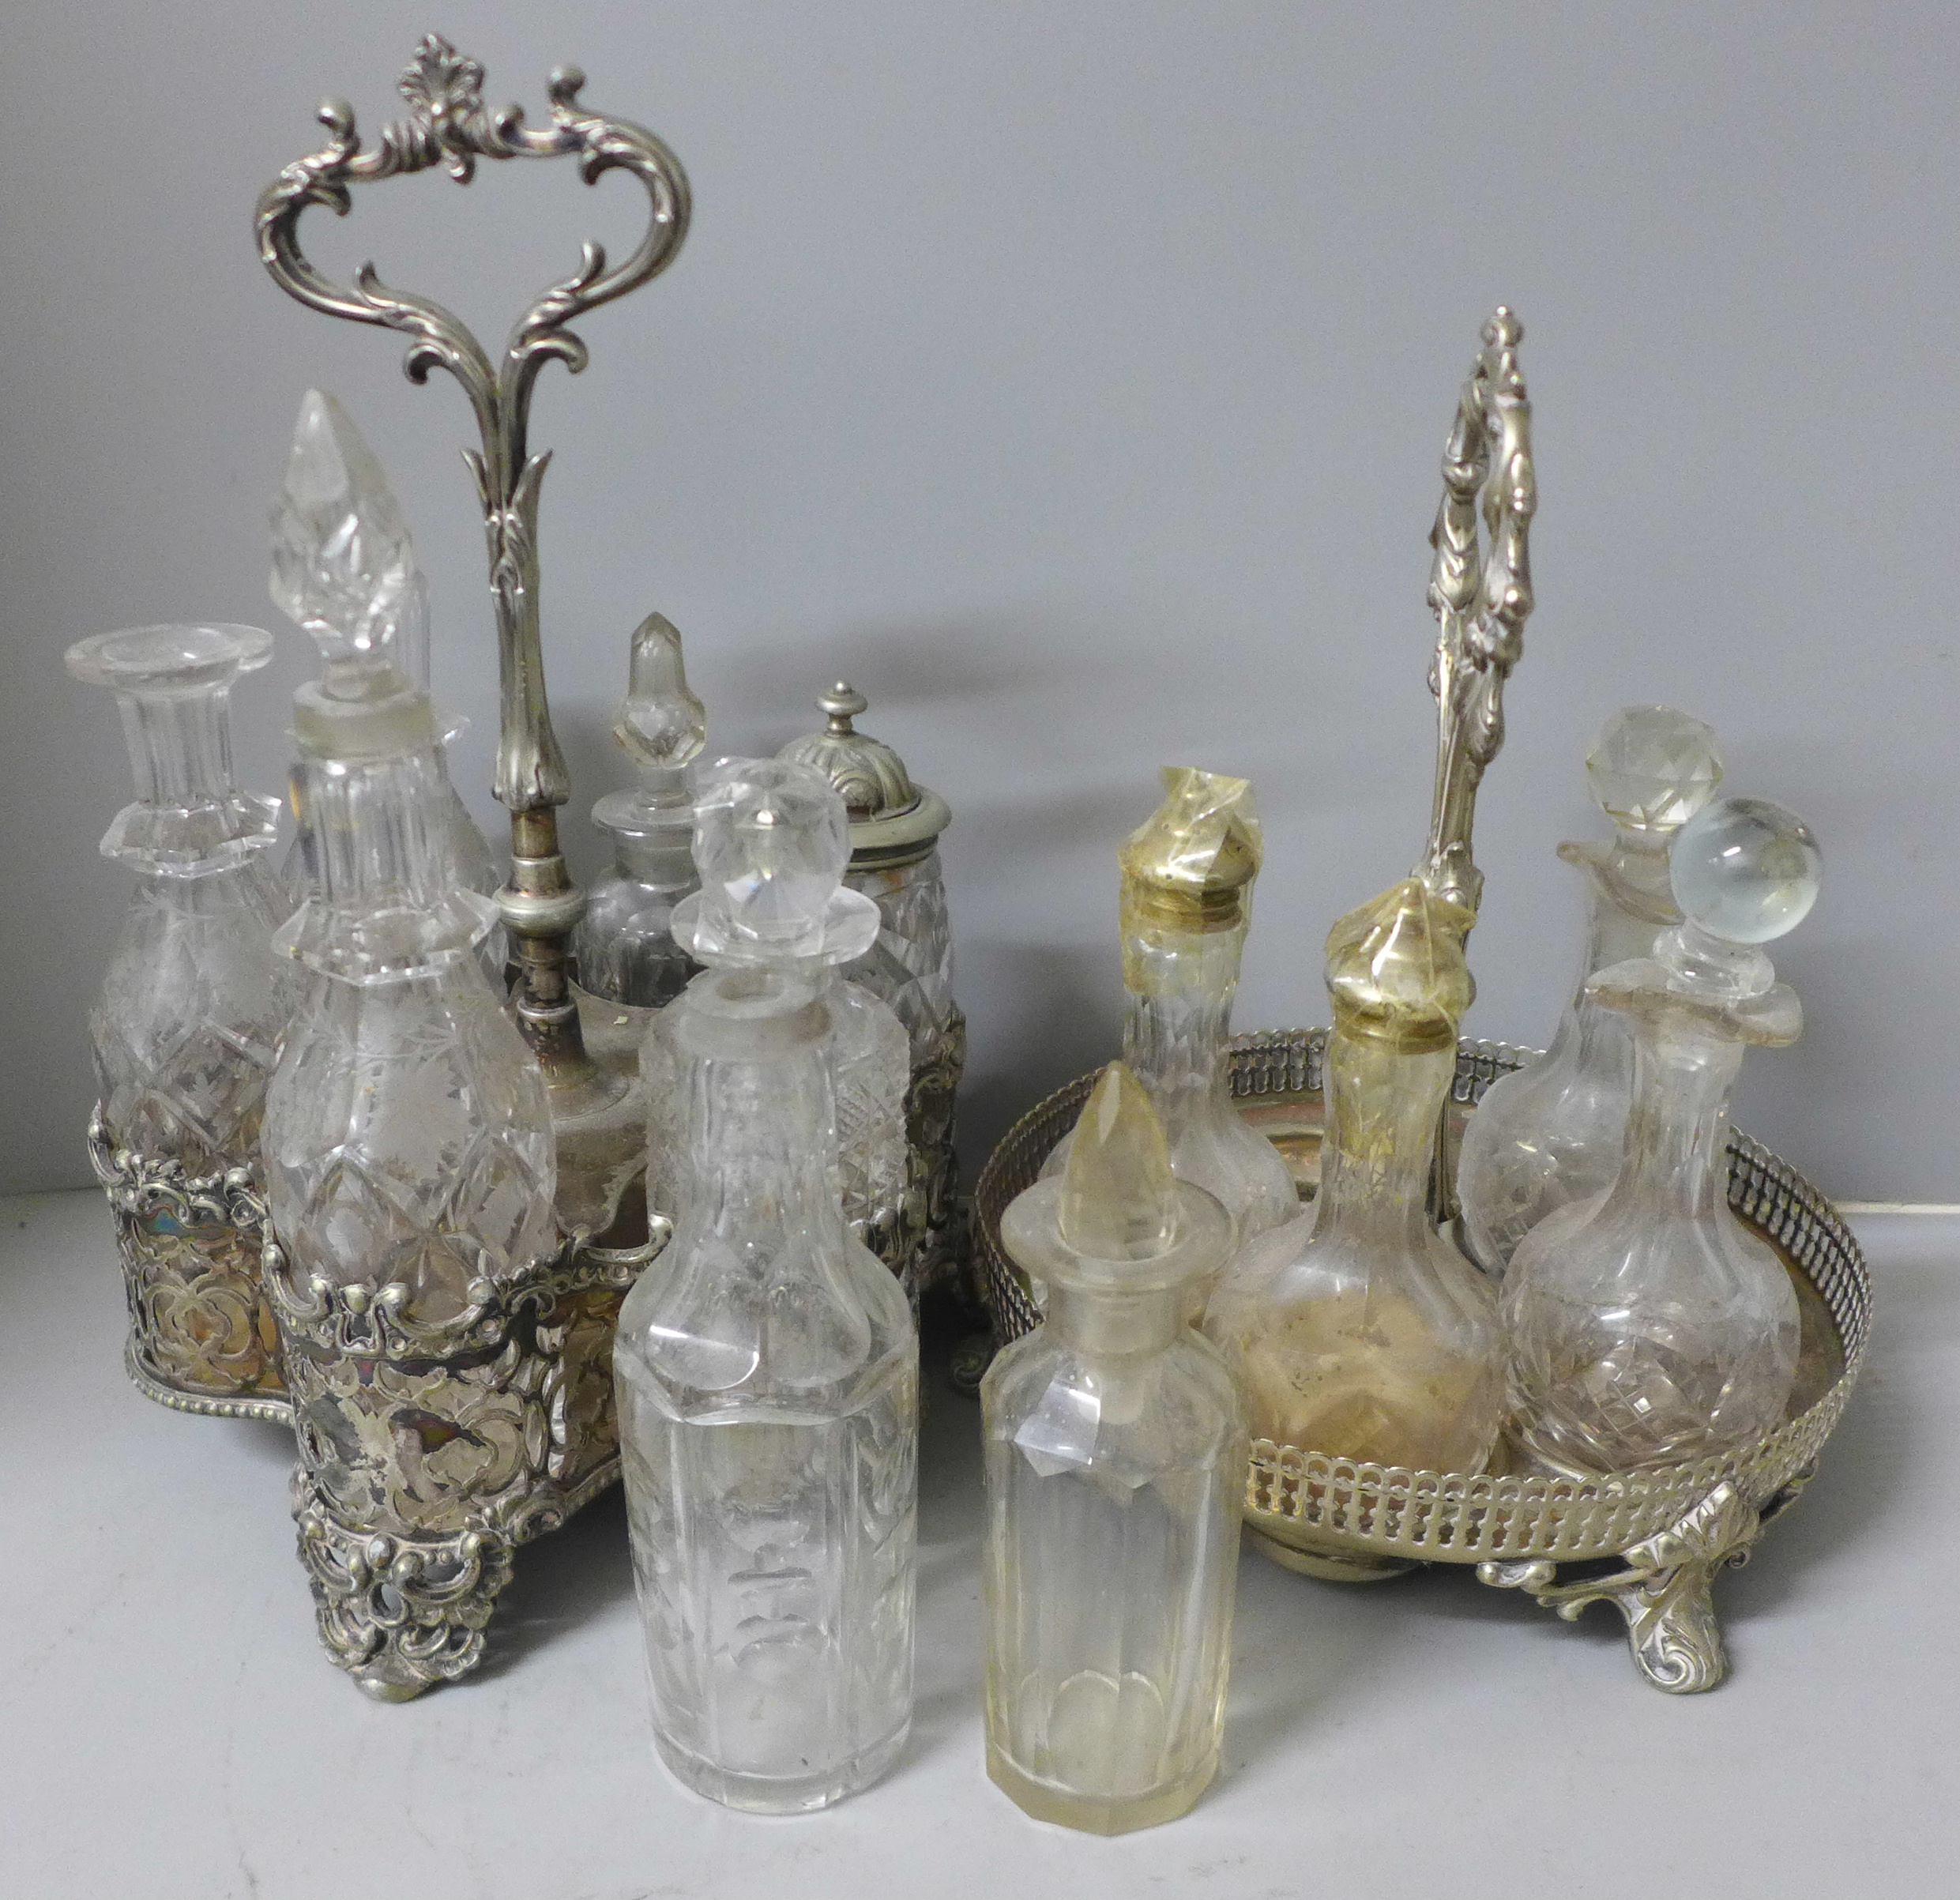 Two plated cruet sets, one six bottle with missing glass bottle and an ornate six bottle cruet set